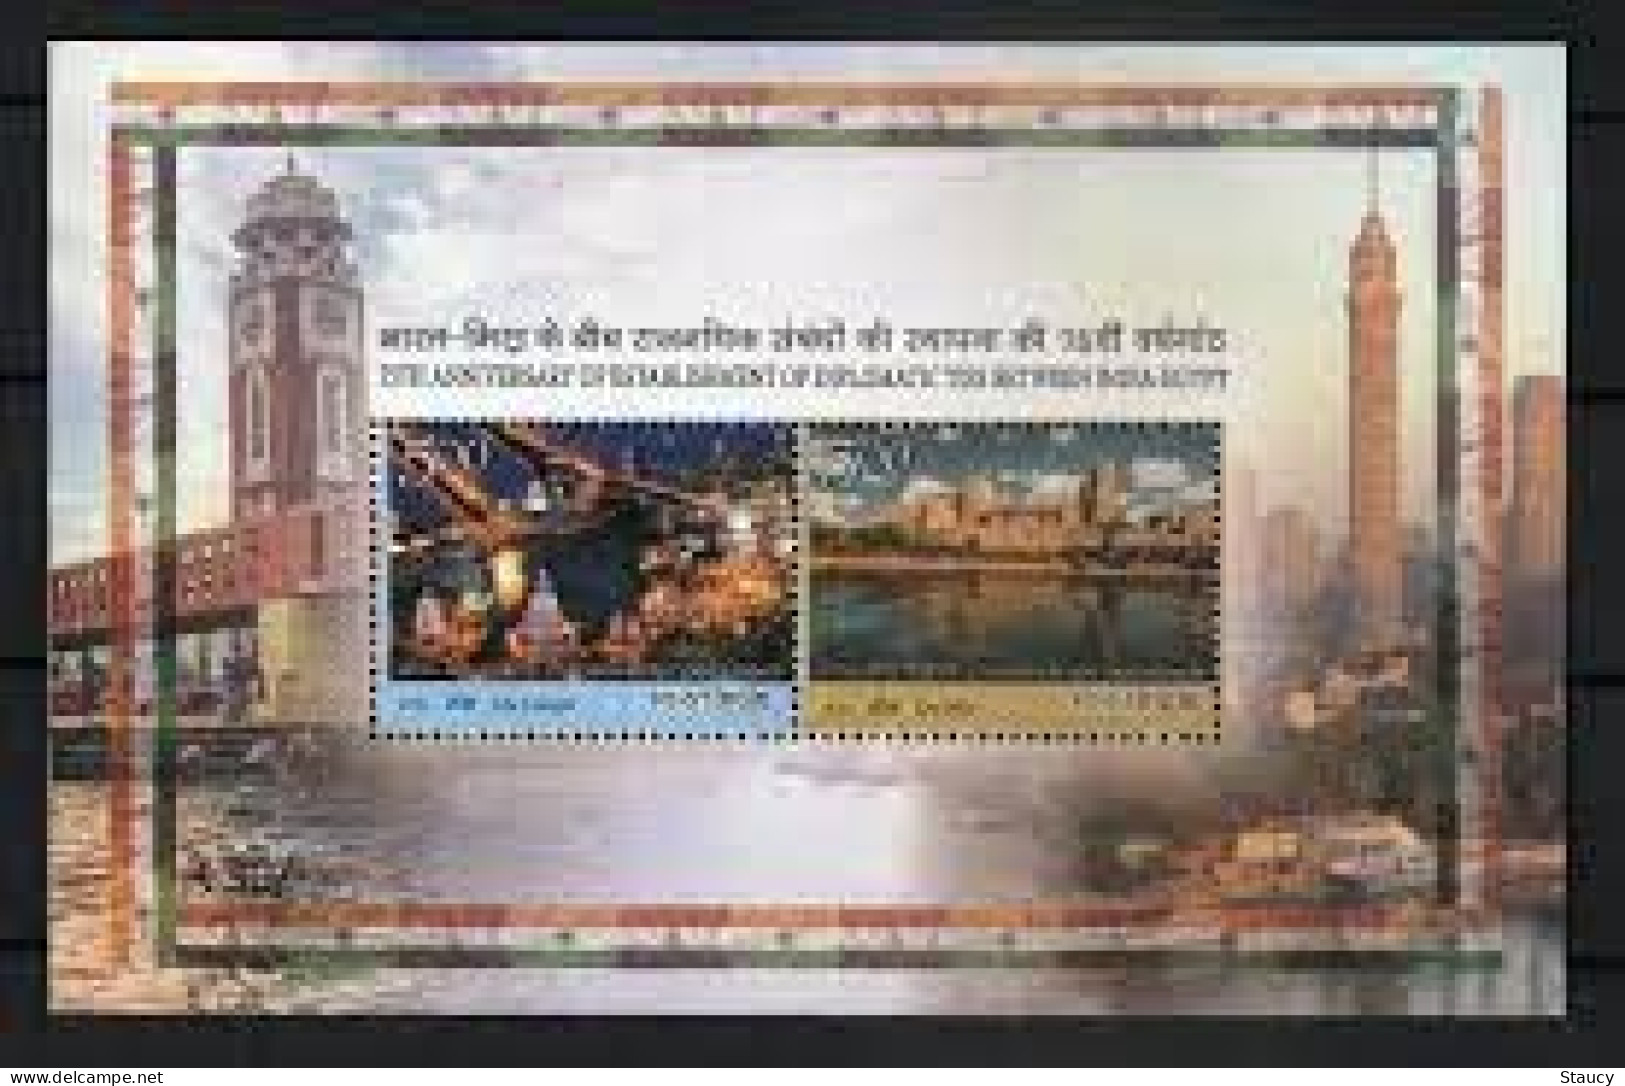 India 2023 Complete Year Collection Of 11 MS / SS MNH Year Pack As Per Scan RARE To Get - Komplette Jahrgänge